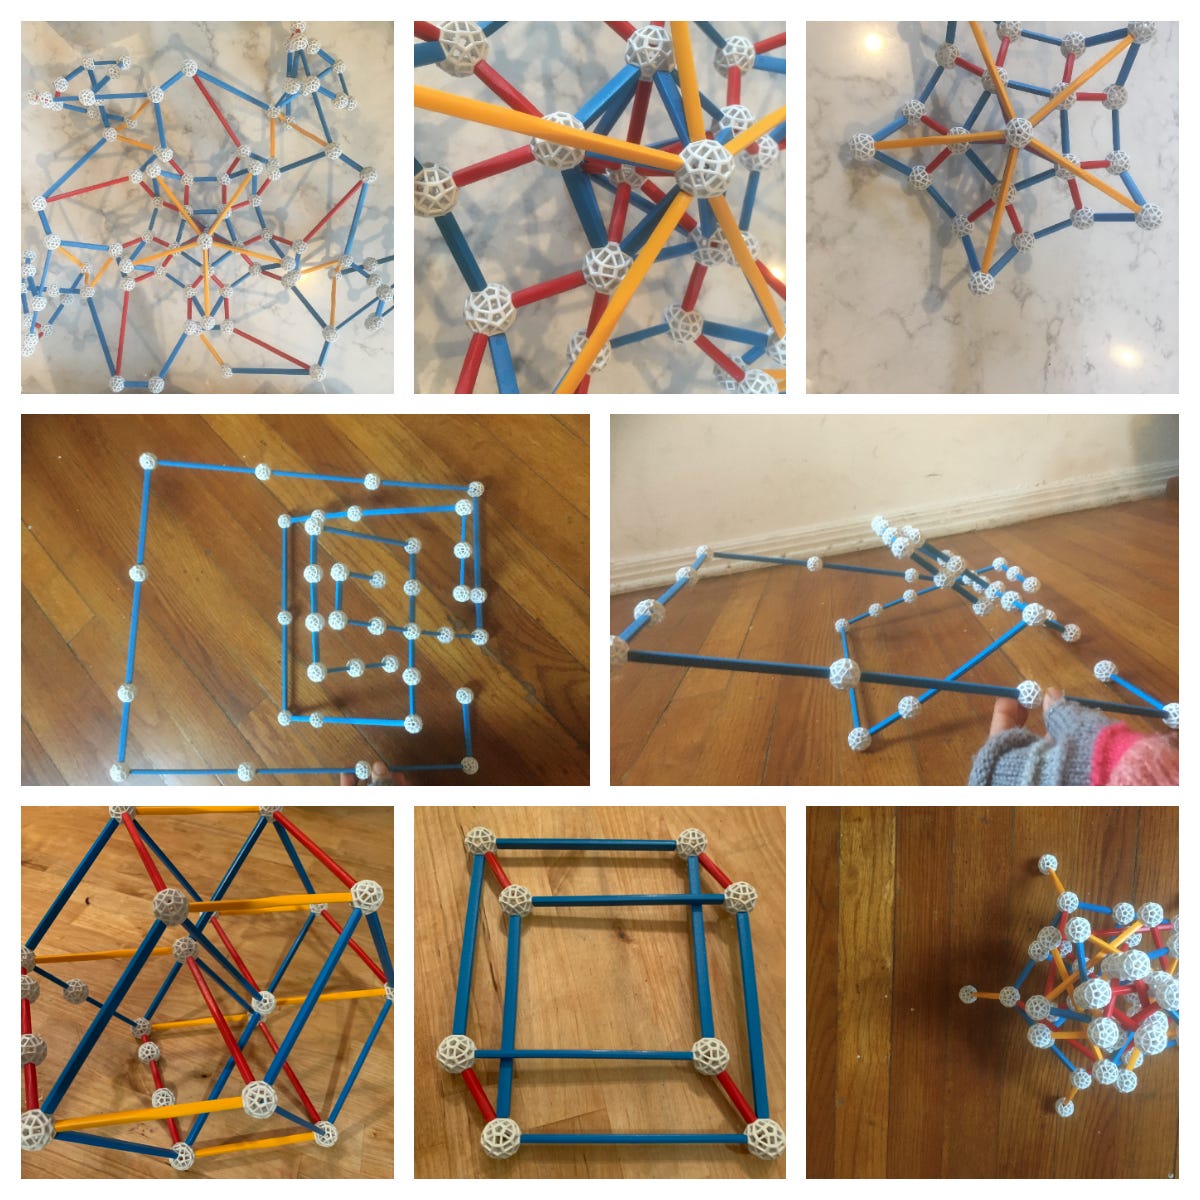 A 3x3 grid of creations made out of Zometool, described below